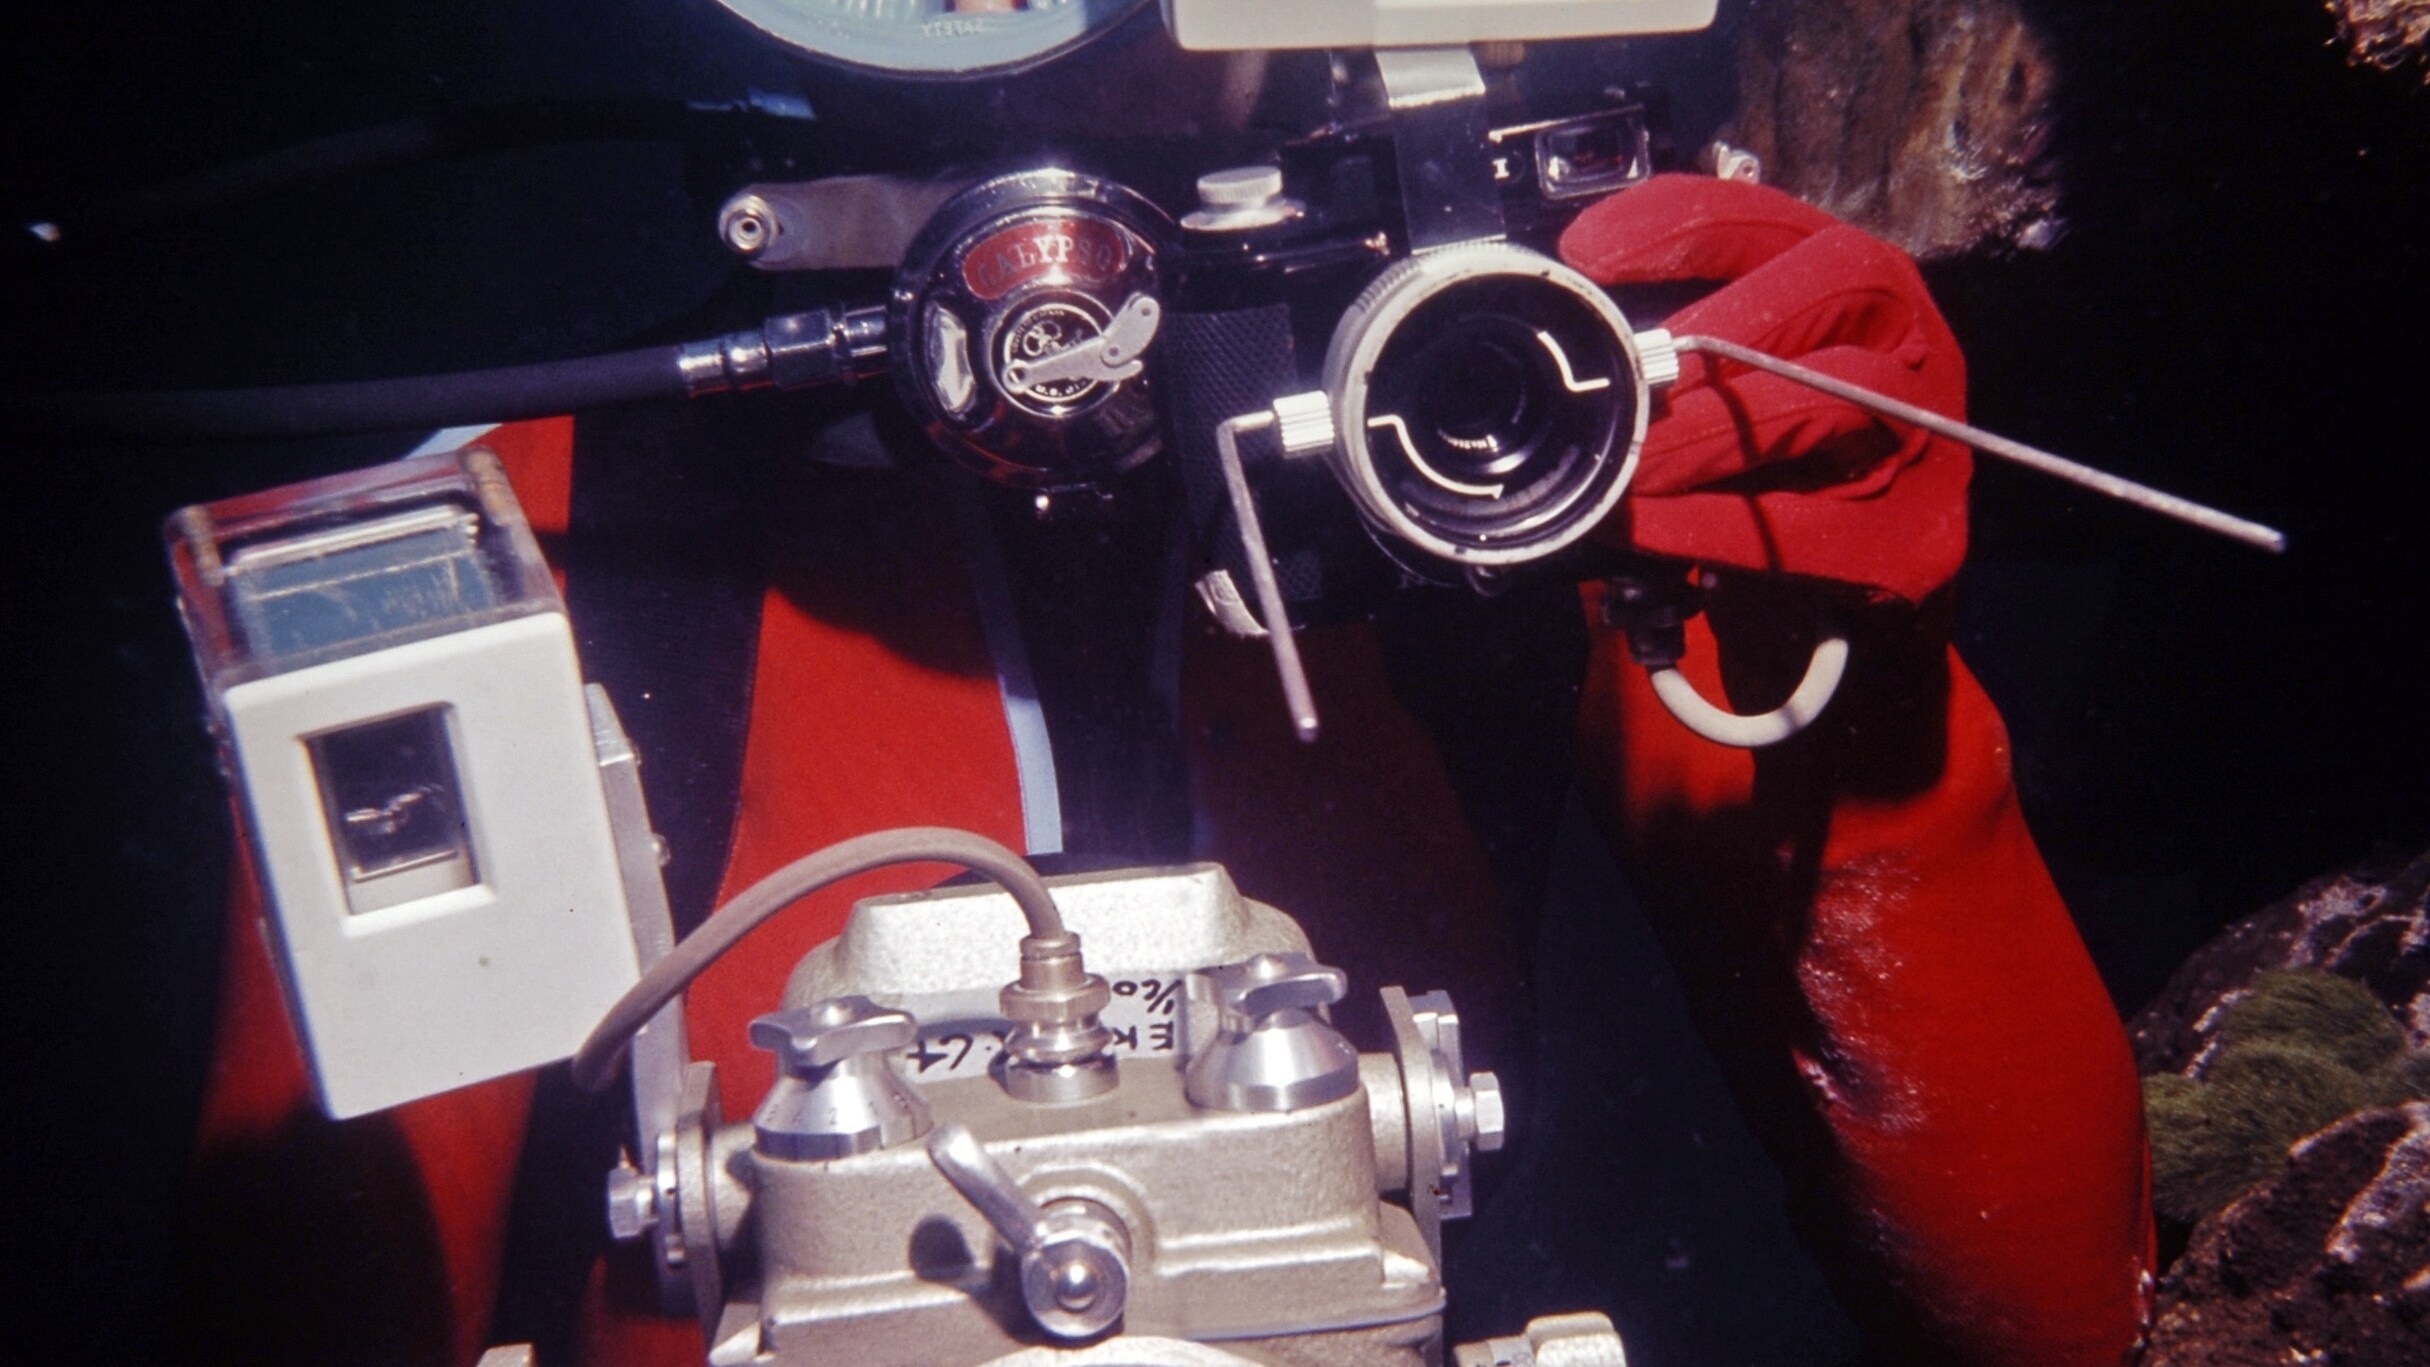 Valerie Taylor underwater with camera equipment, 1970.  (photo credit: Ron & Valerie Taylor)